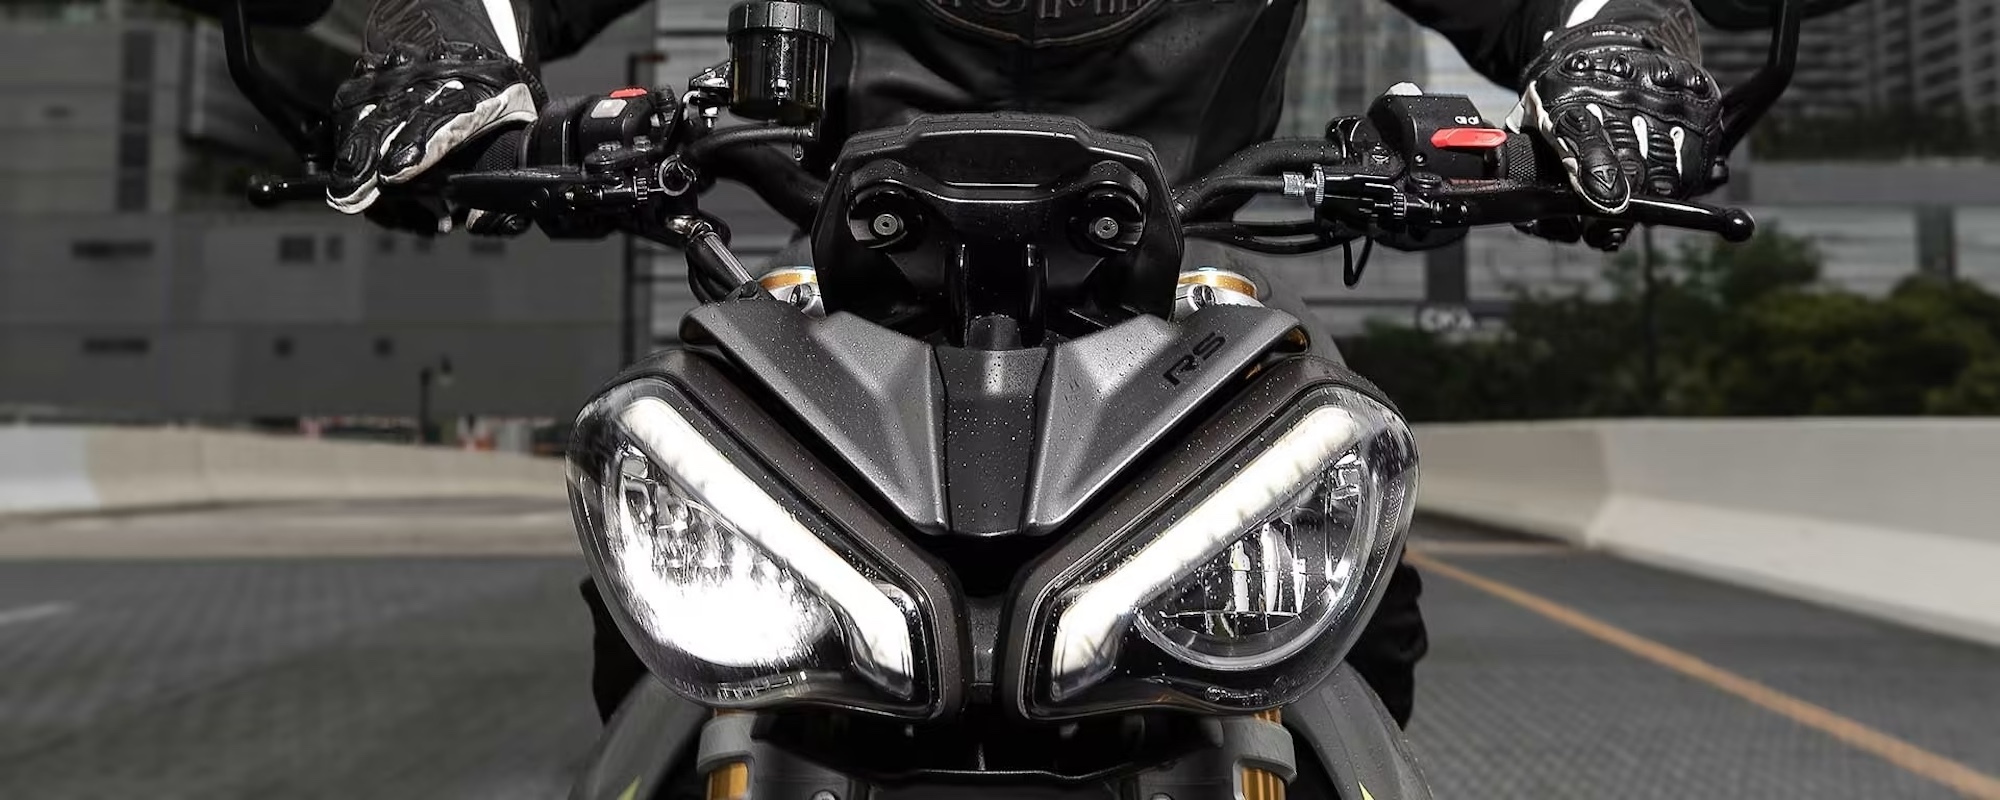 A motorcycle's headlights.